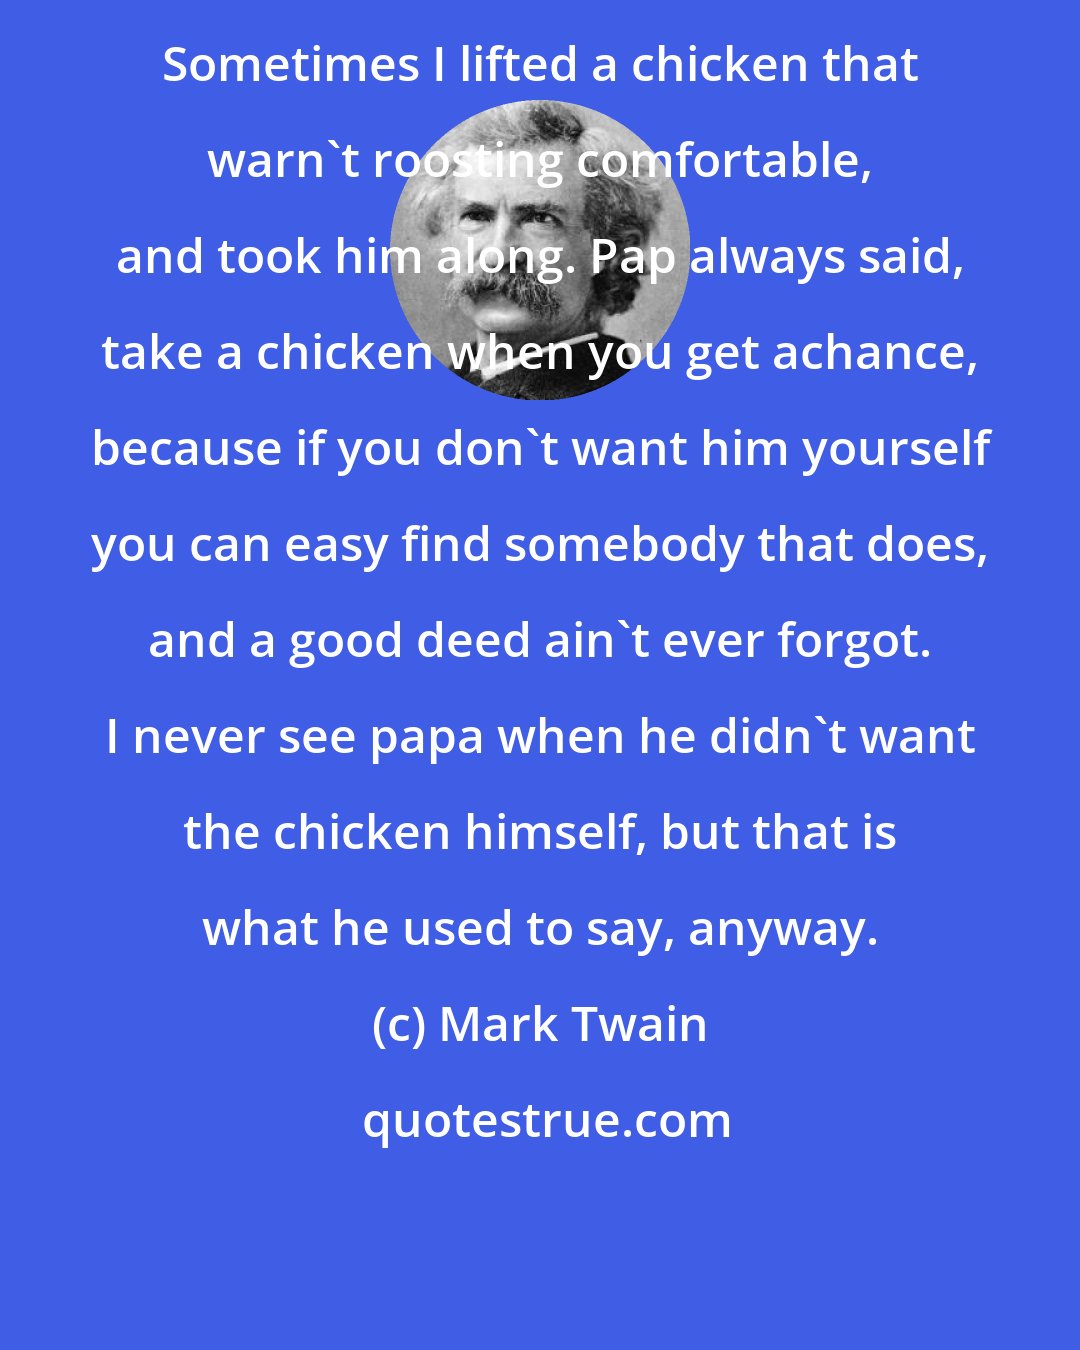 Mark Twain: Sometimes I lifted a chicken that warn't roosting comfortable, and took him along. Pap always said, take a chicken when you get achance, because if you don't want him yourself you can easy find somebody that does, and a good deed ain't ever forgot. I never see papa when he didn't want the chicken himself, but that is what he used to say, anyway.